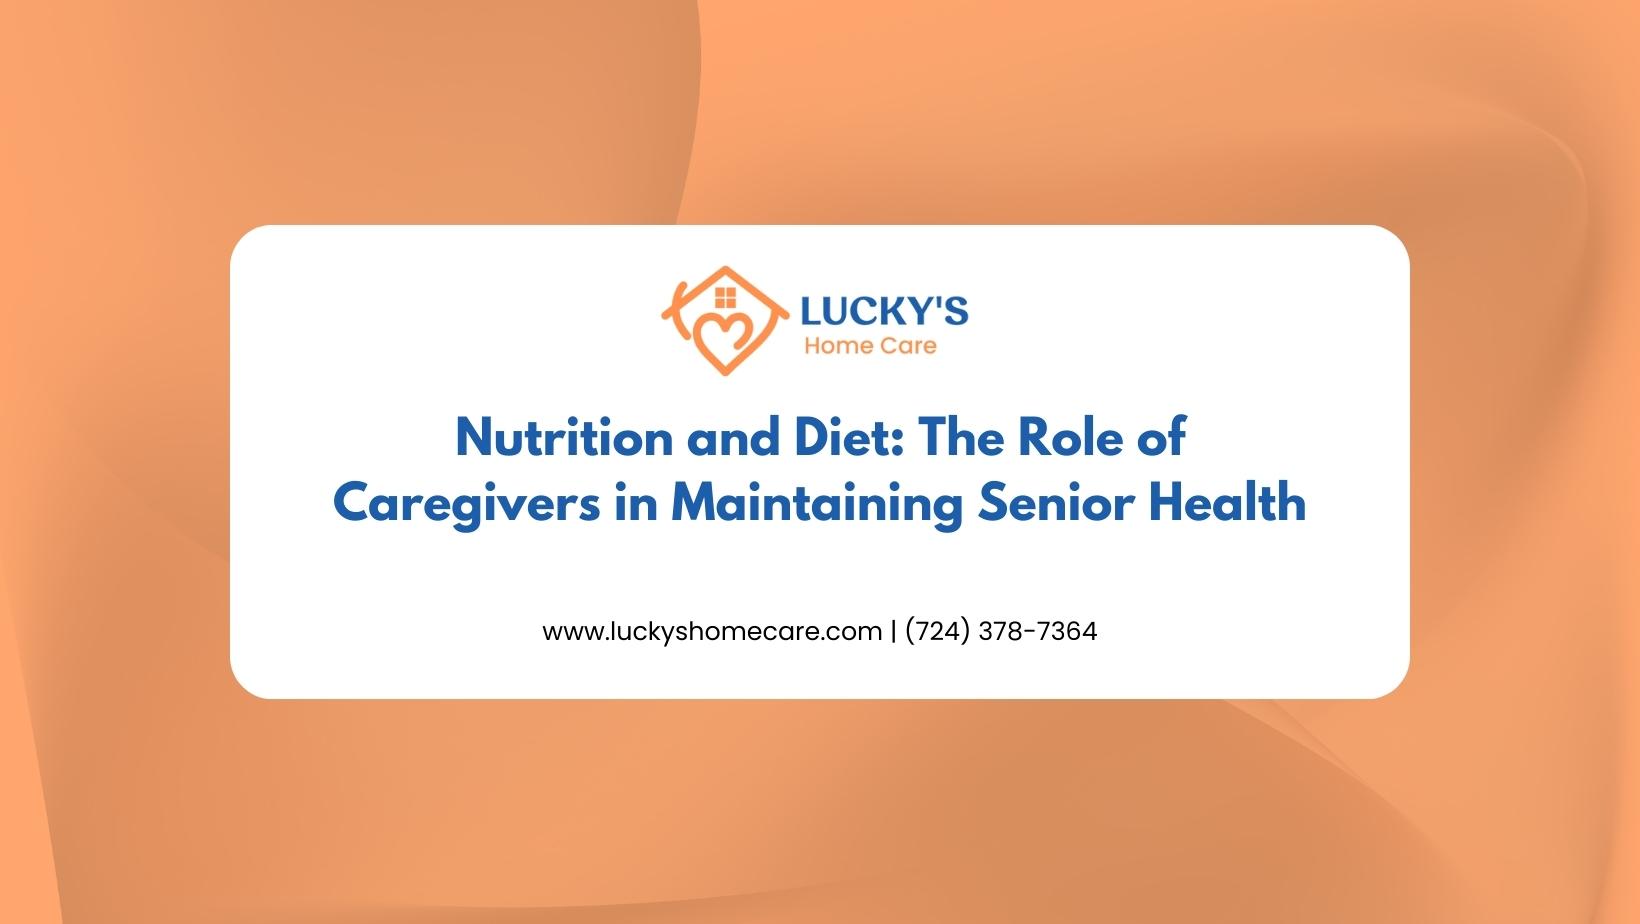 Nutrition and Diet- The Role of Caregivers in Maintaining Senior Health